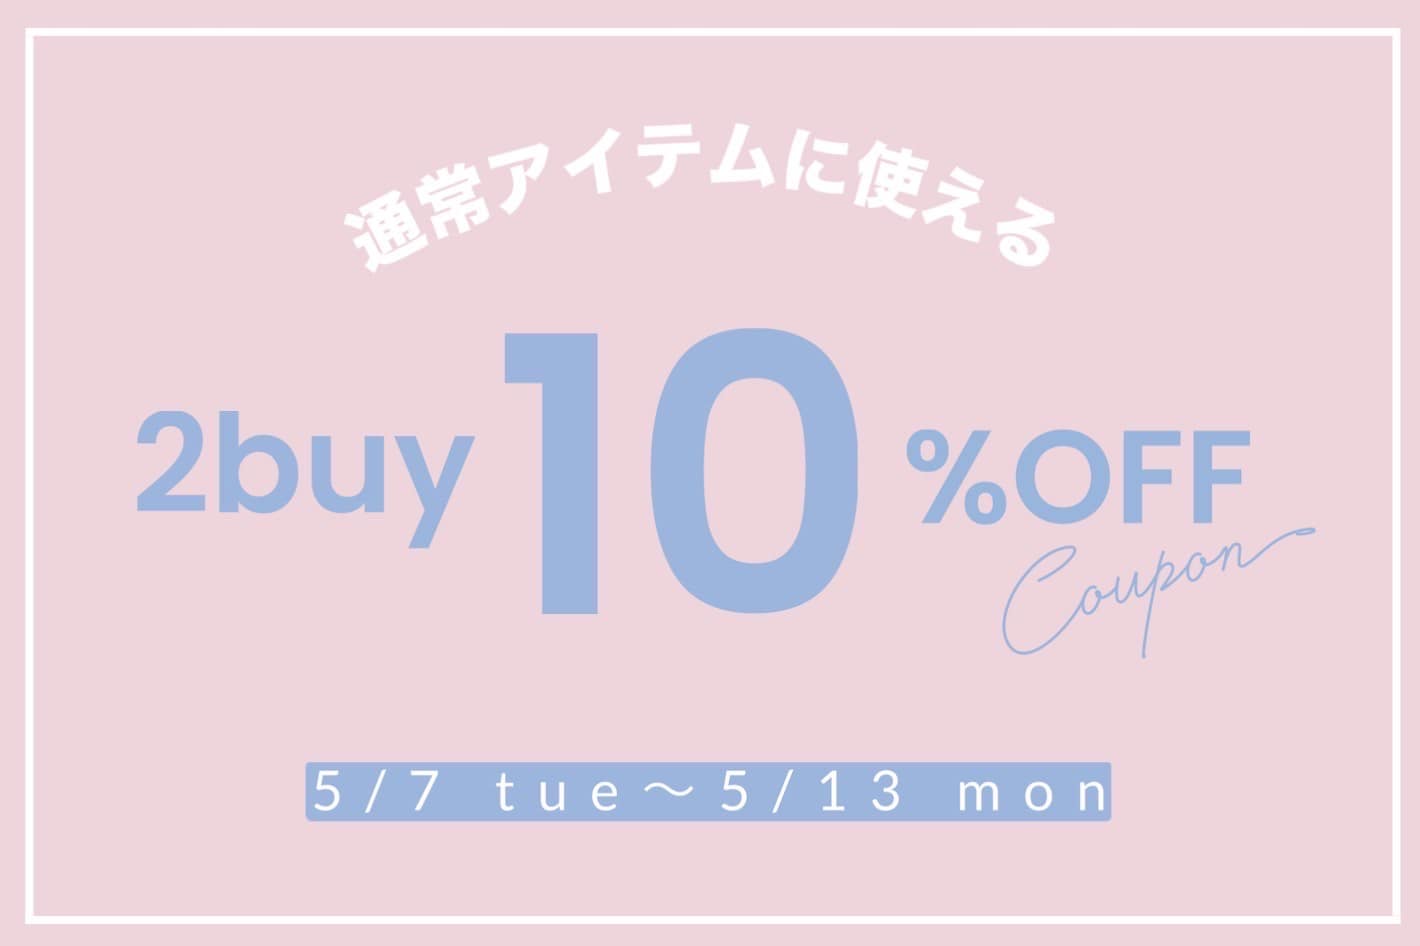 one after another NICE CLAUP 【期間限定】2buy10%OFFクーポン開催中！